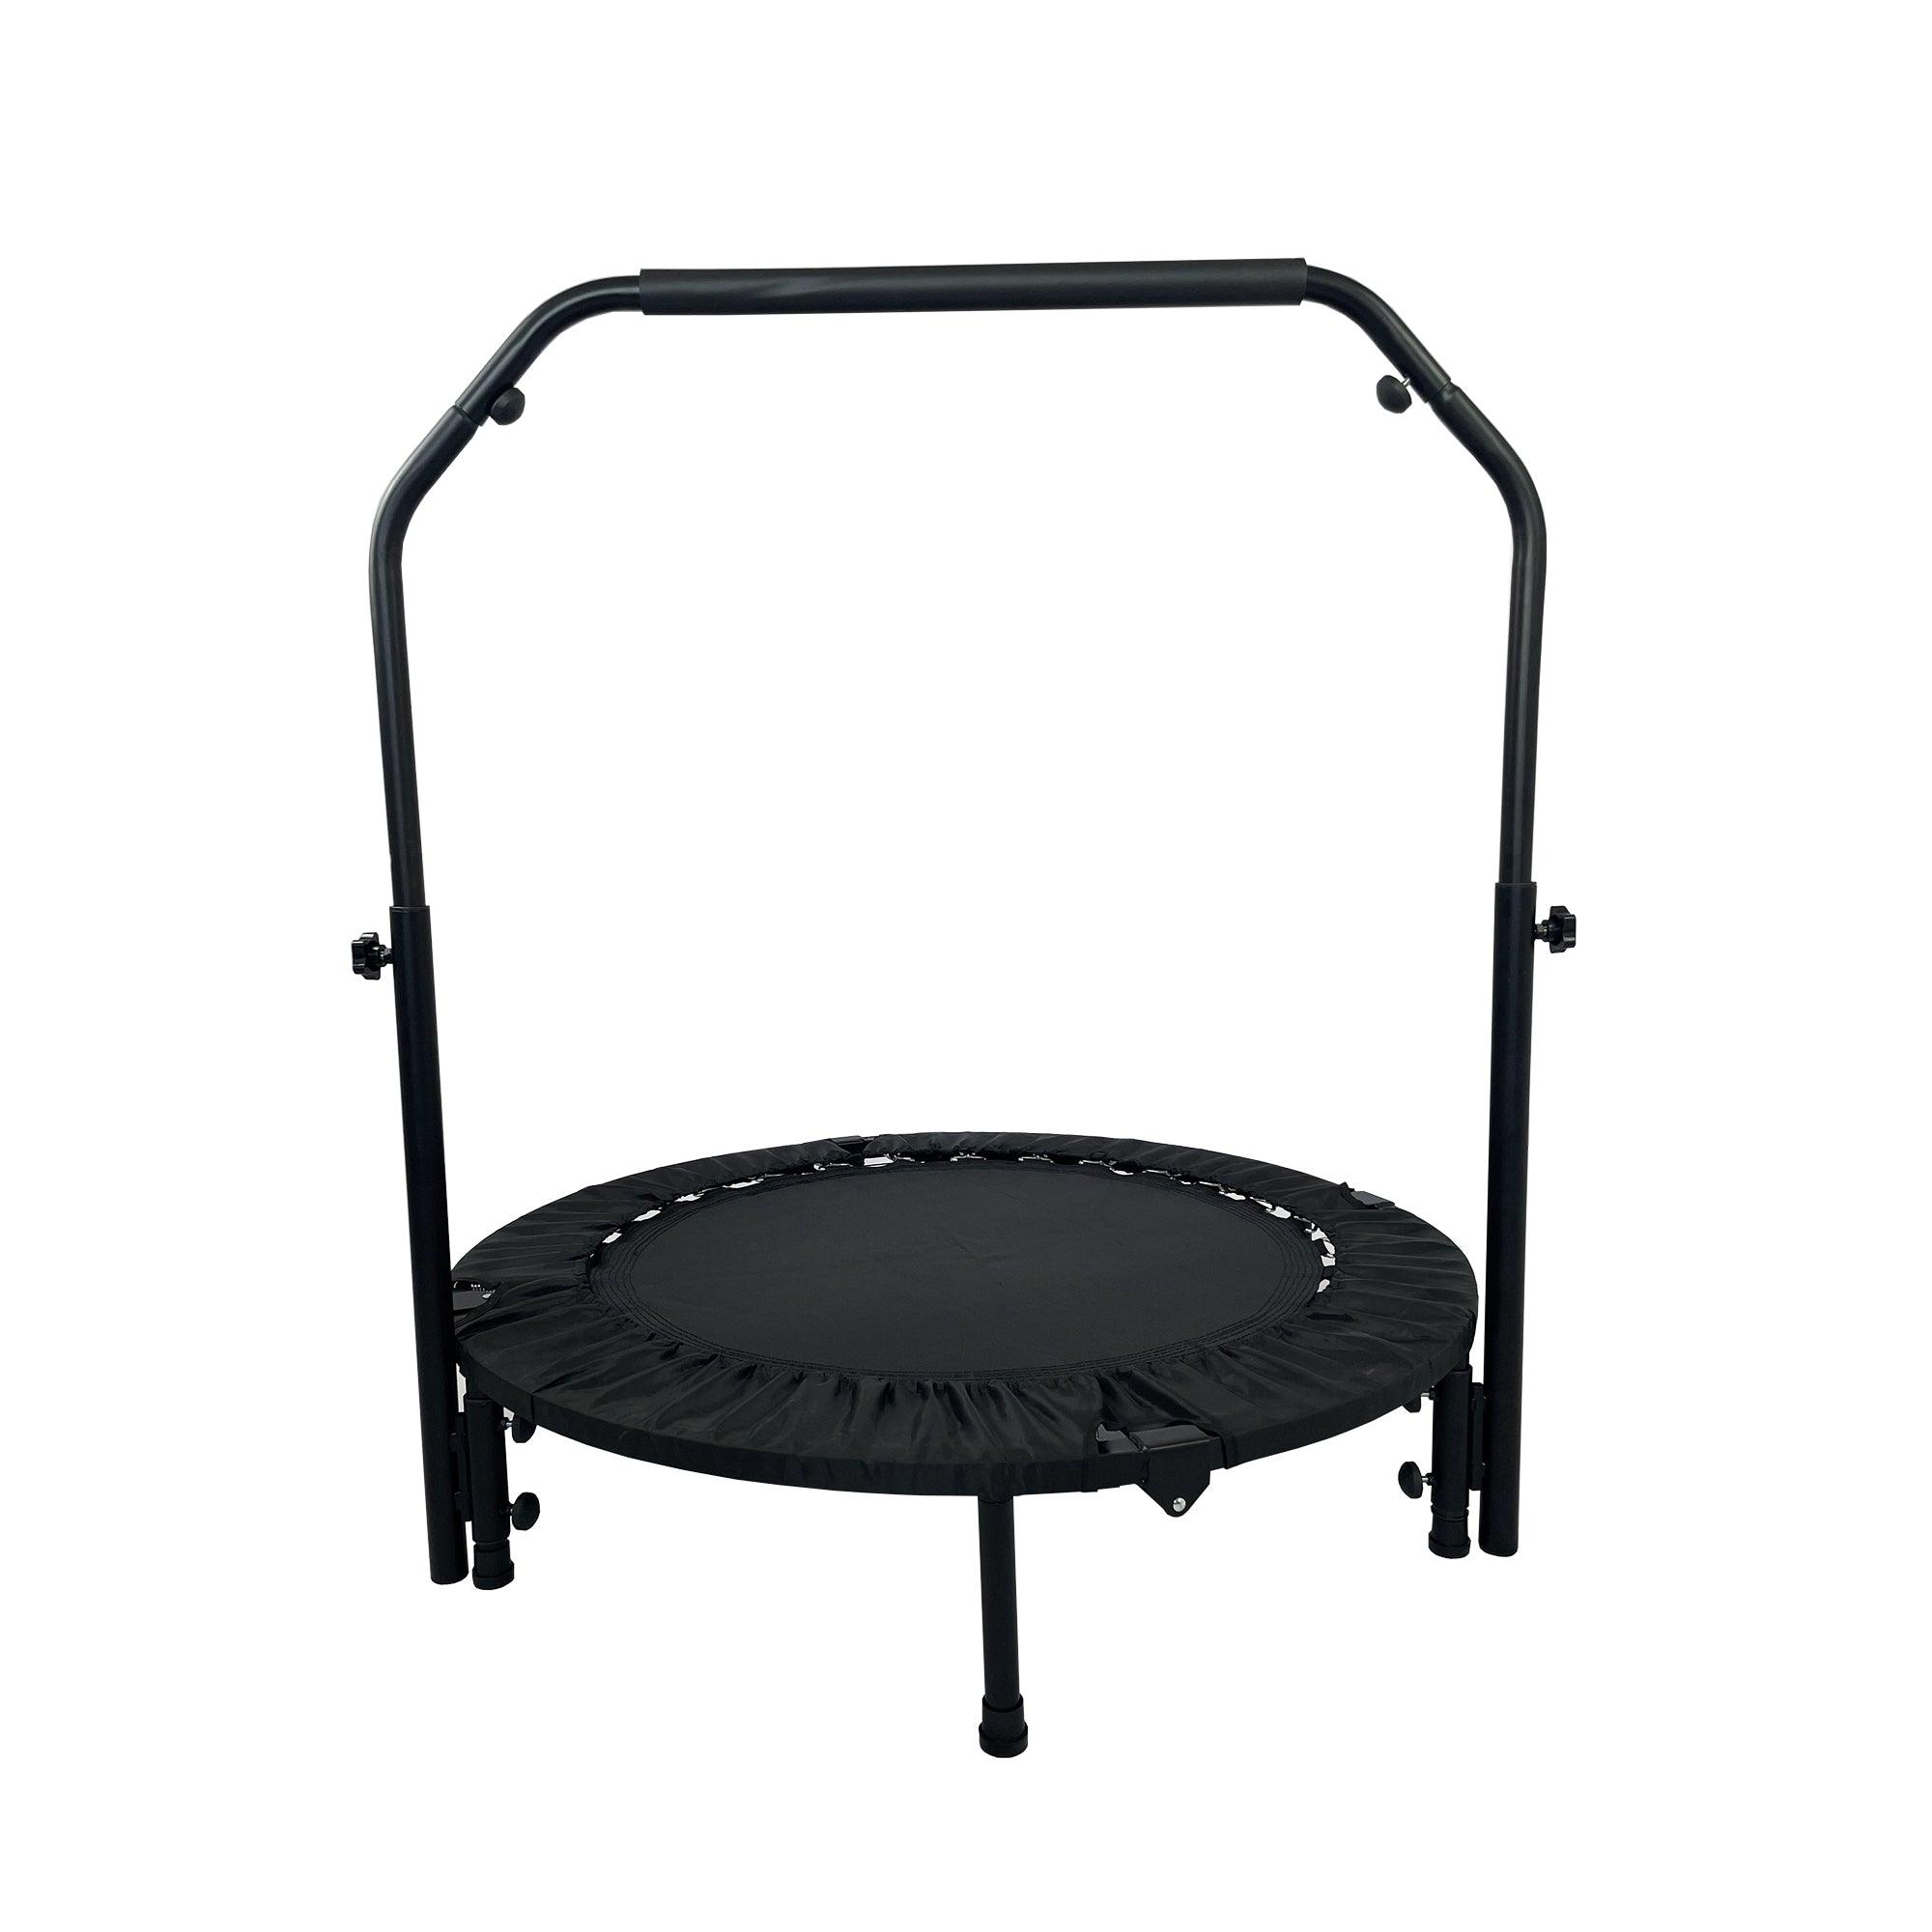 🆓🚛 40" Mini Exercise Trampoline for Adults Or Kids With Adjustable Hand Rail